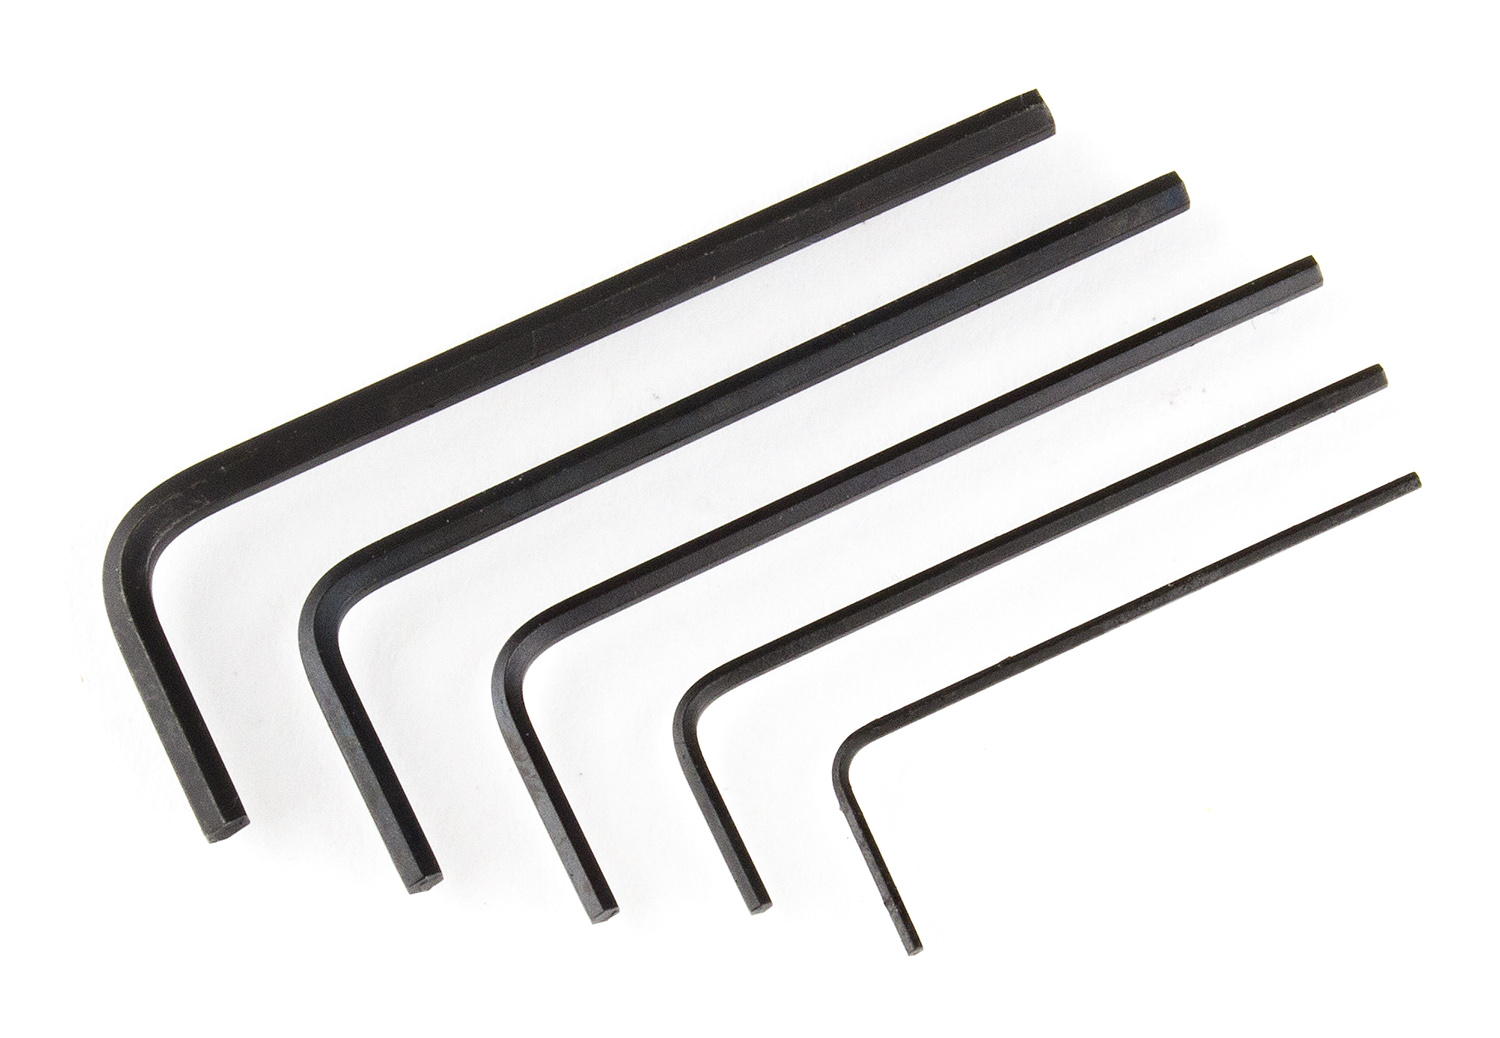 Allen Wrench Set, 5 wrenches